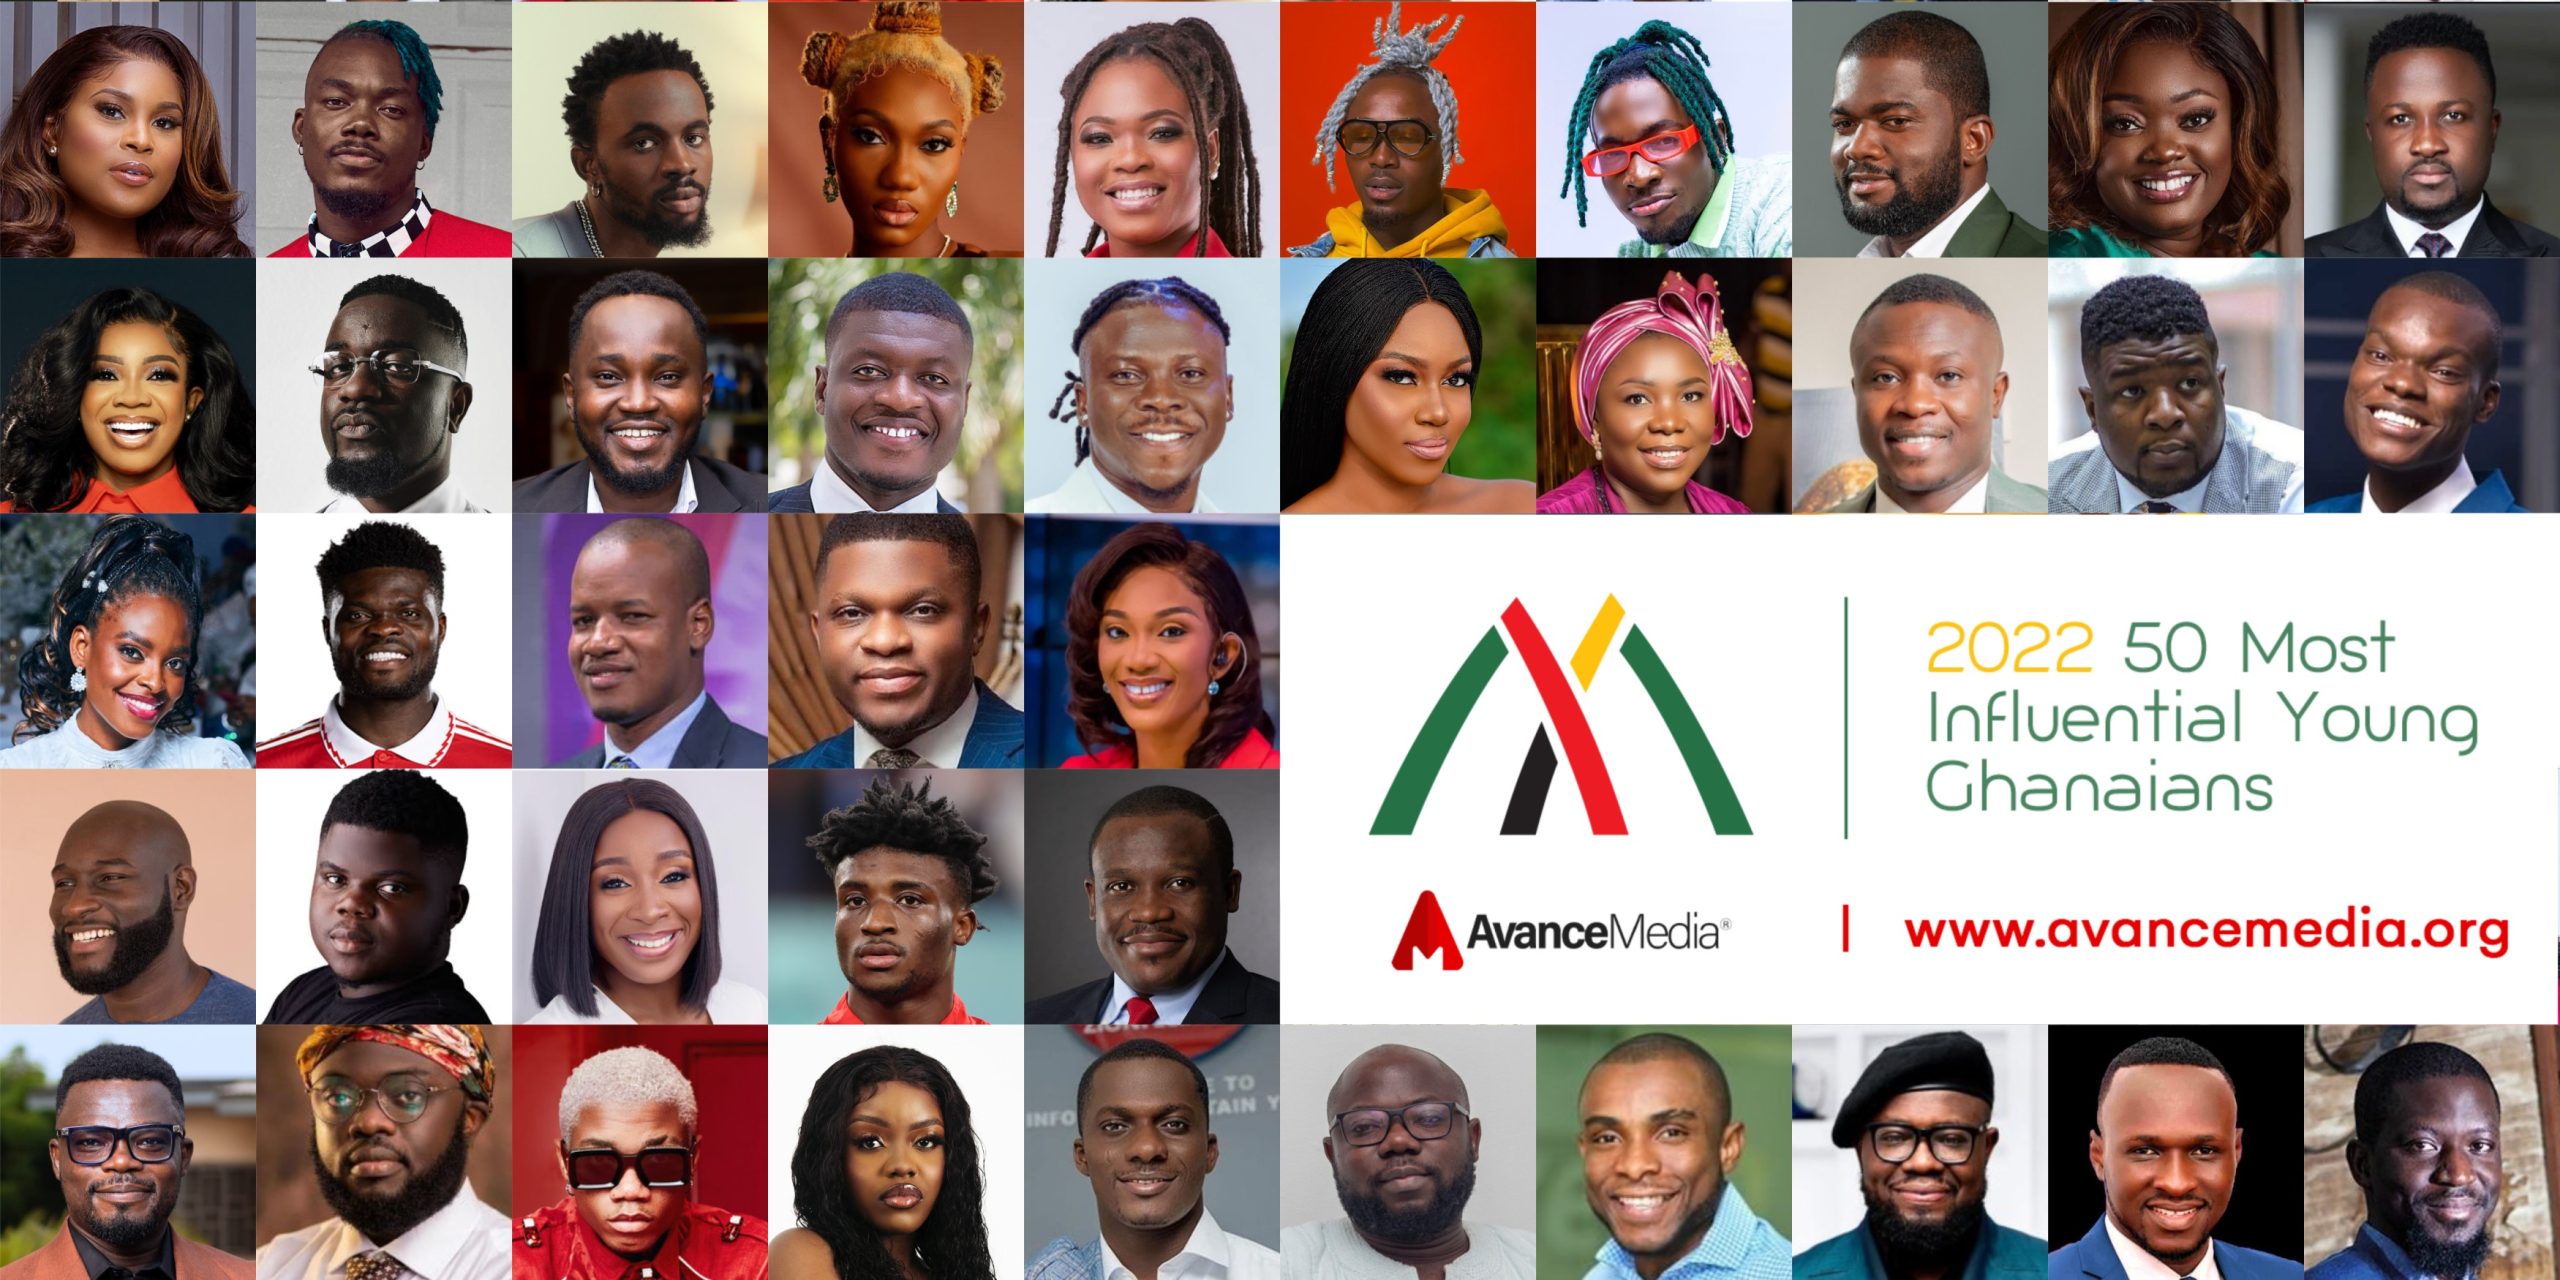 2022's 50 Most Influential Young Ghanaians